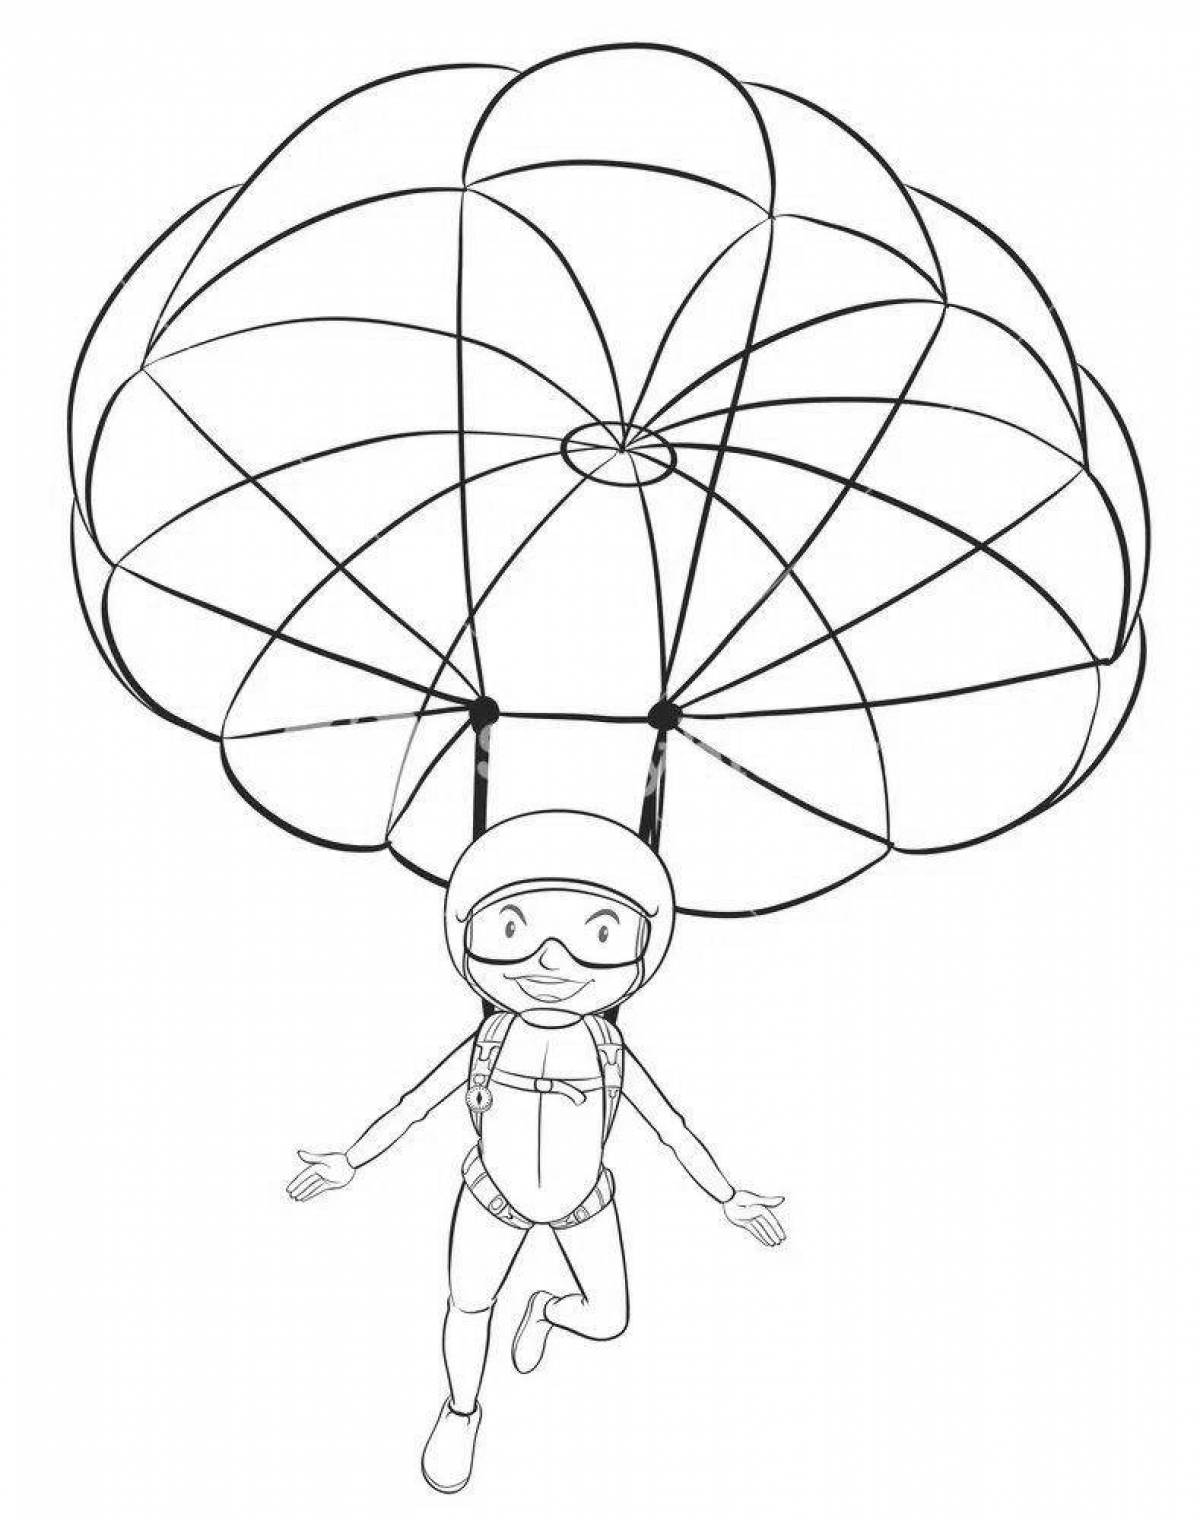 Playful skydiver coloring page for kids